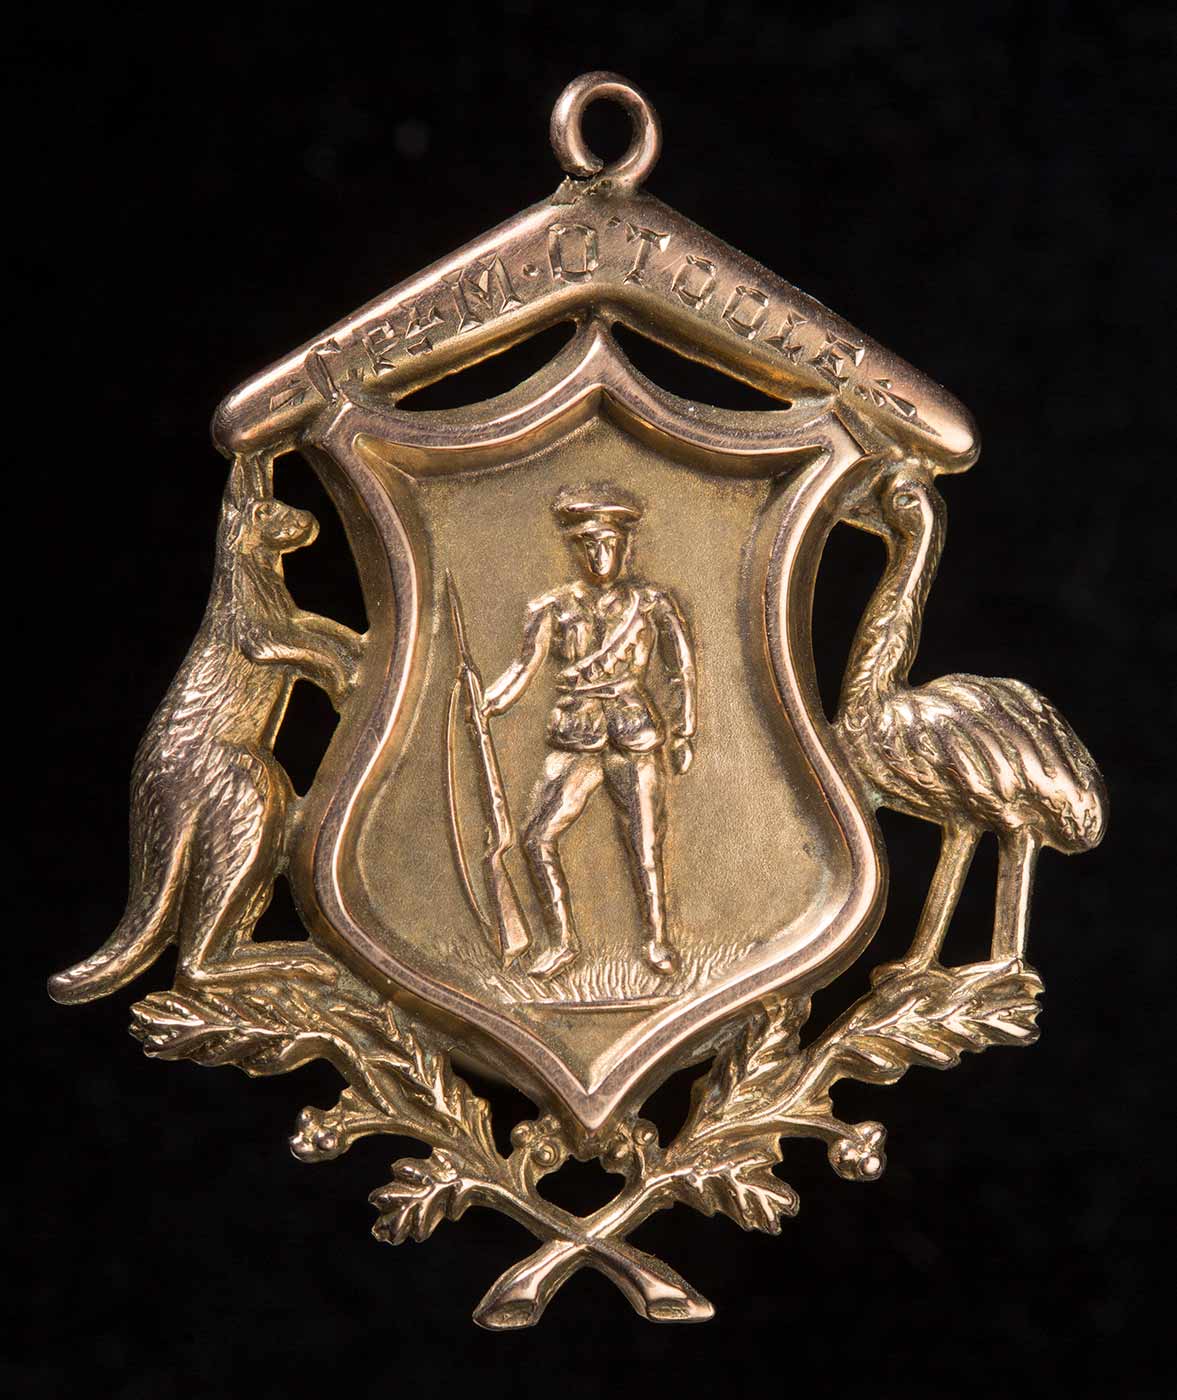 Fob medallion shaped as a shield flanked by a kangaroo and an emu with a boomerang and crossed sprays of wattle below. The boomerang is inscribed 